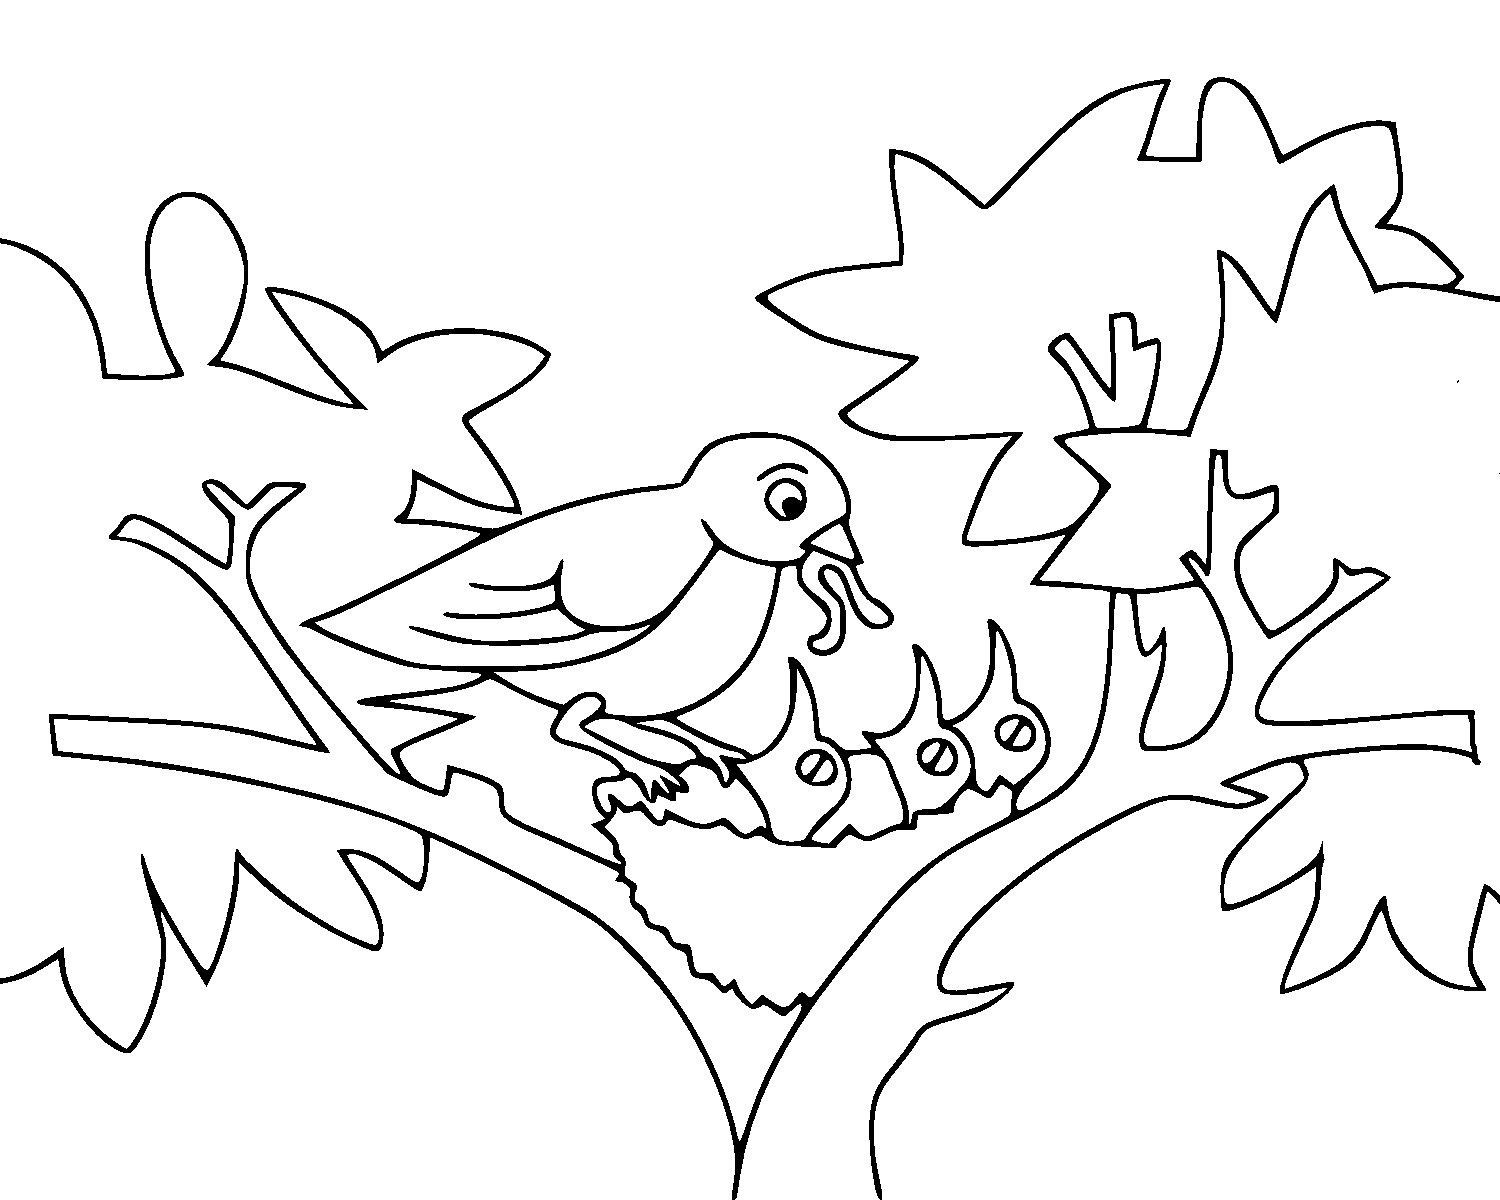 colouring pages for birds different birds coloring pages coloring home colouring birds pages for 